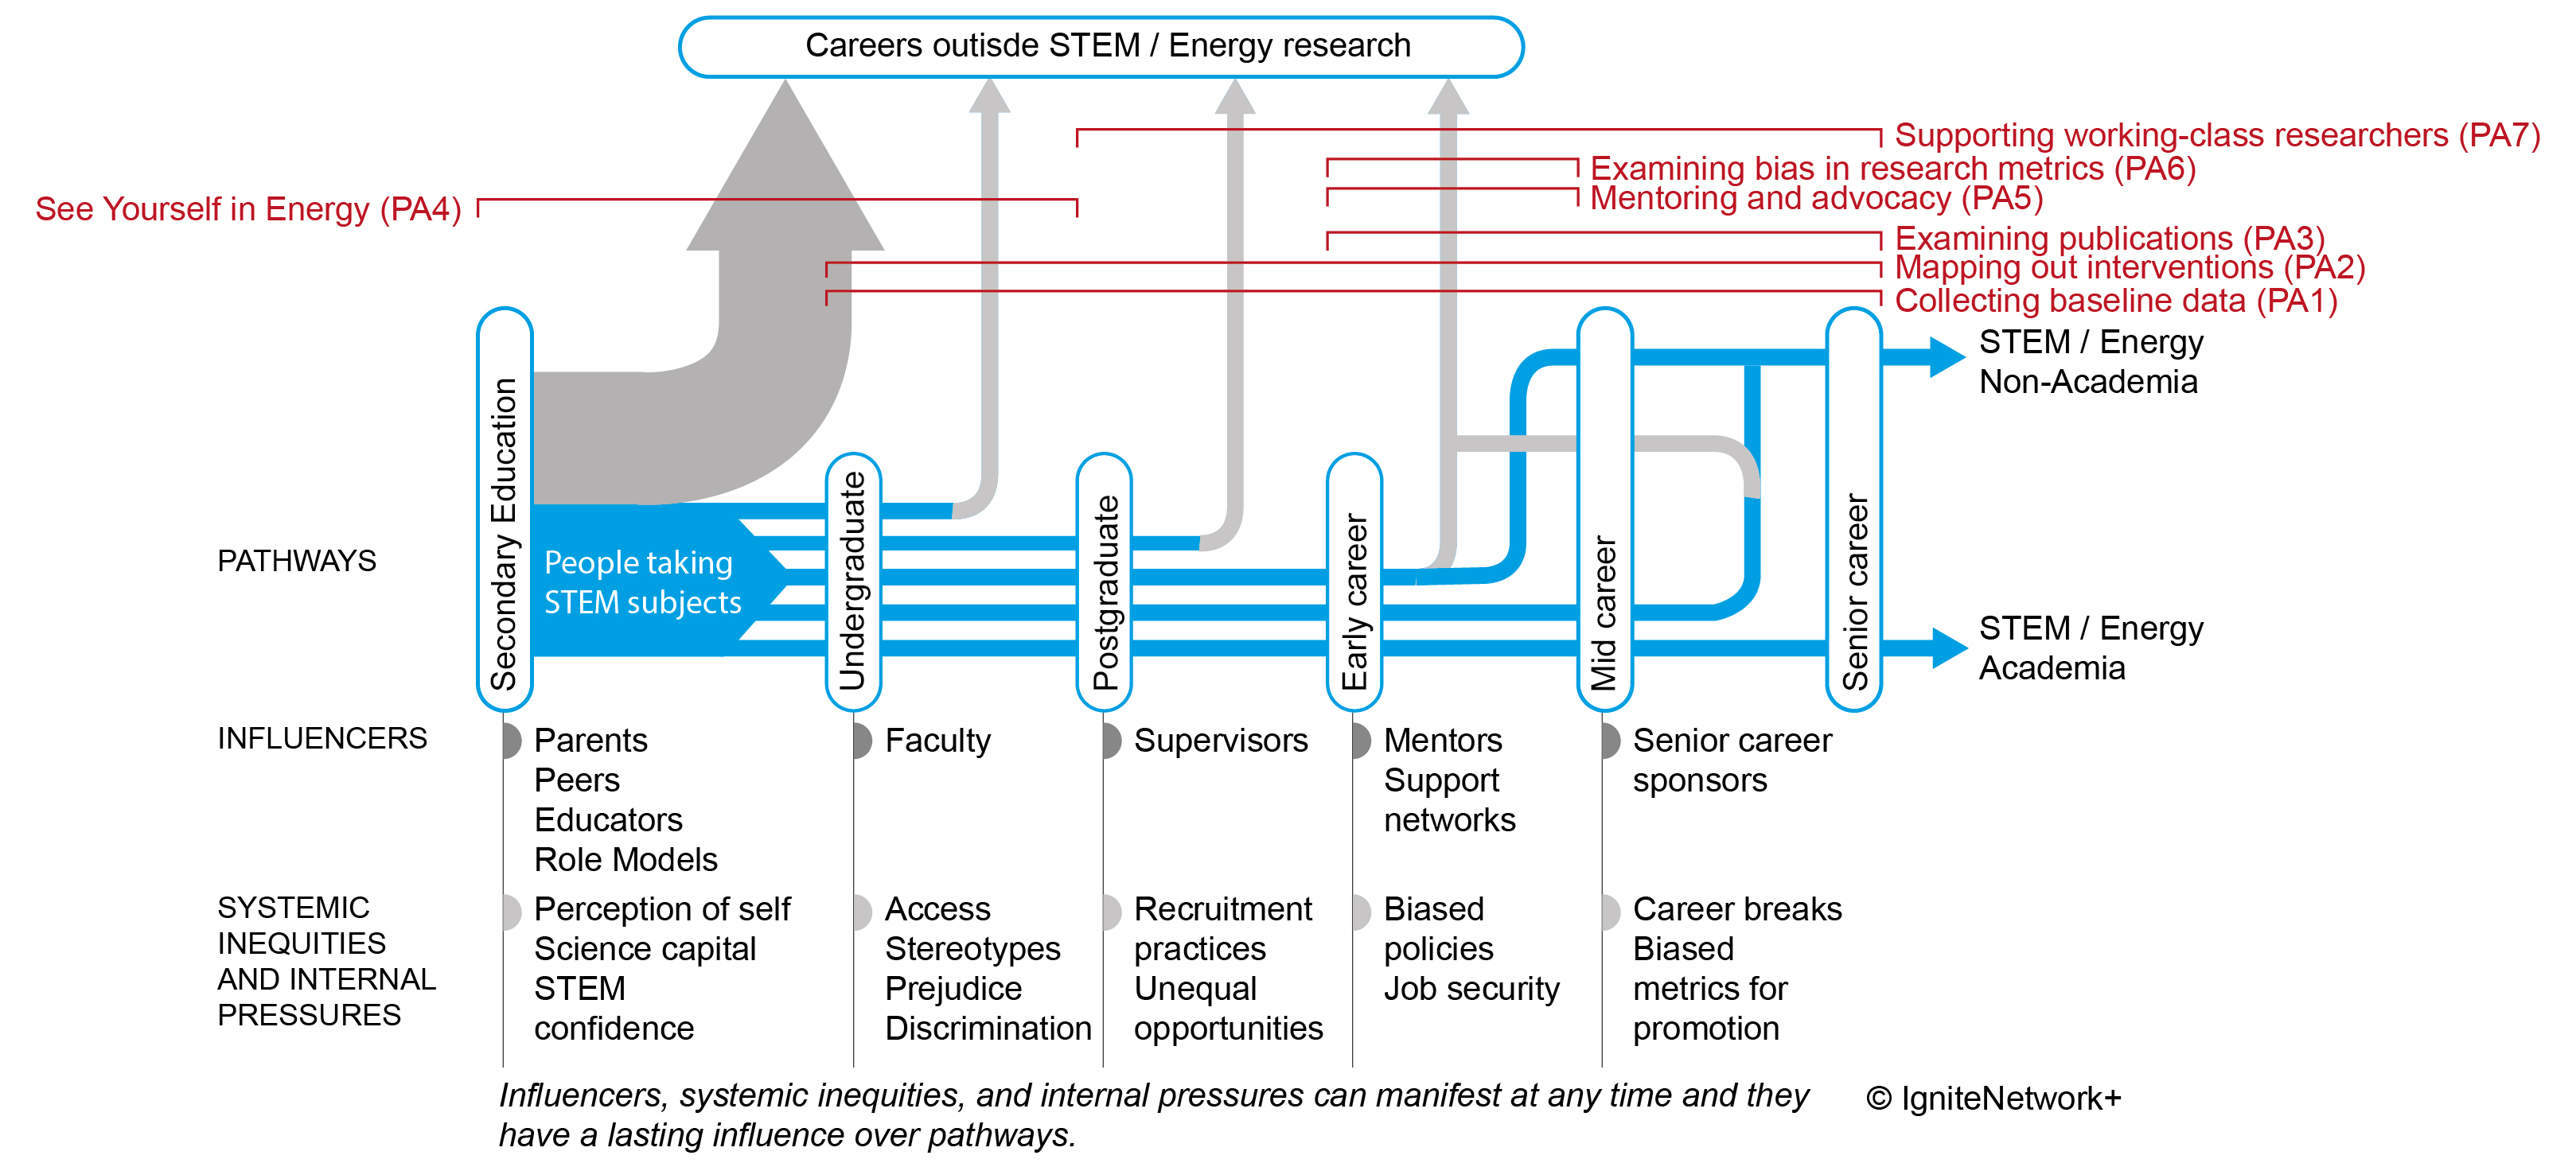 Career Pipeline Diagram Image showing the energy career pipeline pathway and the network+ prescribed activities. A pipeline diagram with 6 different career stages and pathways of people taking Science, Technology, Engineering and Maths subjects (the acronym STEM).  The diagram shows blue arrows from each stage to the next, and grey arrows to represent routes to careers outside STEM / Energy Research, both academic and non-academic.  There are a total of six career stages, under the first five there are influencers and systemic inequalities and internal pressures which can manifest at any time and they have a lasting influence over pathway, as follows: 1.	Secondary Education: Influencers are parents, peers, educators, role models Systematic inequalities and internal pressure include Perceptions of self, science capital and STEM confidence 2.	Undergraduate: Influencer is Faculty Systematic inequalities and internal pressure include access, stereotypes, prejudice and discrimination 3.	Postgraduate: Influencer is Supervisors Systematic inequalities and internal pressure include recruitment practices and unequal opportunities 4.	Early career Influencer are mentors, Support networks Systematic inequalities and internal pressure include biased policies and Job security 5.	Mid-career: Influencers are senior career sponsors Systematic inequalities and internal pressure include career breaks and biased metrics for promotion 6.	Senior career is the final career stage with routes out of STEM / Energy   Shown in red along the top of the diagram are the seven IGNITE Network+ deliverables which we have called prescribed activities (PA1 - 7) which will identify and challenge systemic inequities at all stages of the career pipeline, as well as providing positive support mechanisms. Prescribed Activity 1 (PA1) – Collecting baselines data covers stages 2 -6 of the pipeline Prescribed Activity 2 (PA2) - Mapping out interventions covers stages 2 to 6 of the pipeline   Prescribed Activity 3 (PA3) - Examining publications covers stages 4 to 6 of the pipeline  Prescribed Activity 4 (PA4) – See yourself in Energy covers stages 1 to 3 of the pipeline  Prescribed Activity 5 (PA5) – Mentoring and advocacy covers stages 4 and 5 of the pipeline  Prescribed Activity 6 (PA6) – Examining bias in research metrics covers stages 4 and 5 of the pipeline  Prescribed Activity 7 (PA7) – Supporting working-class researchers covers stages 3 to 6 of the pipeline